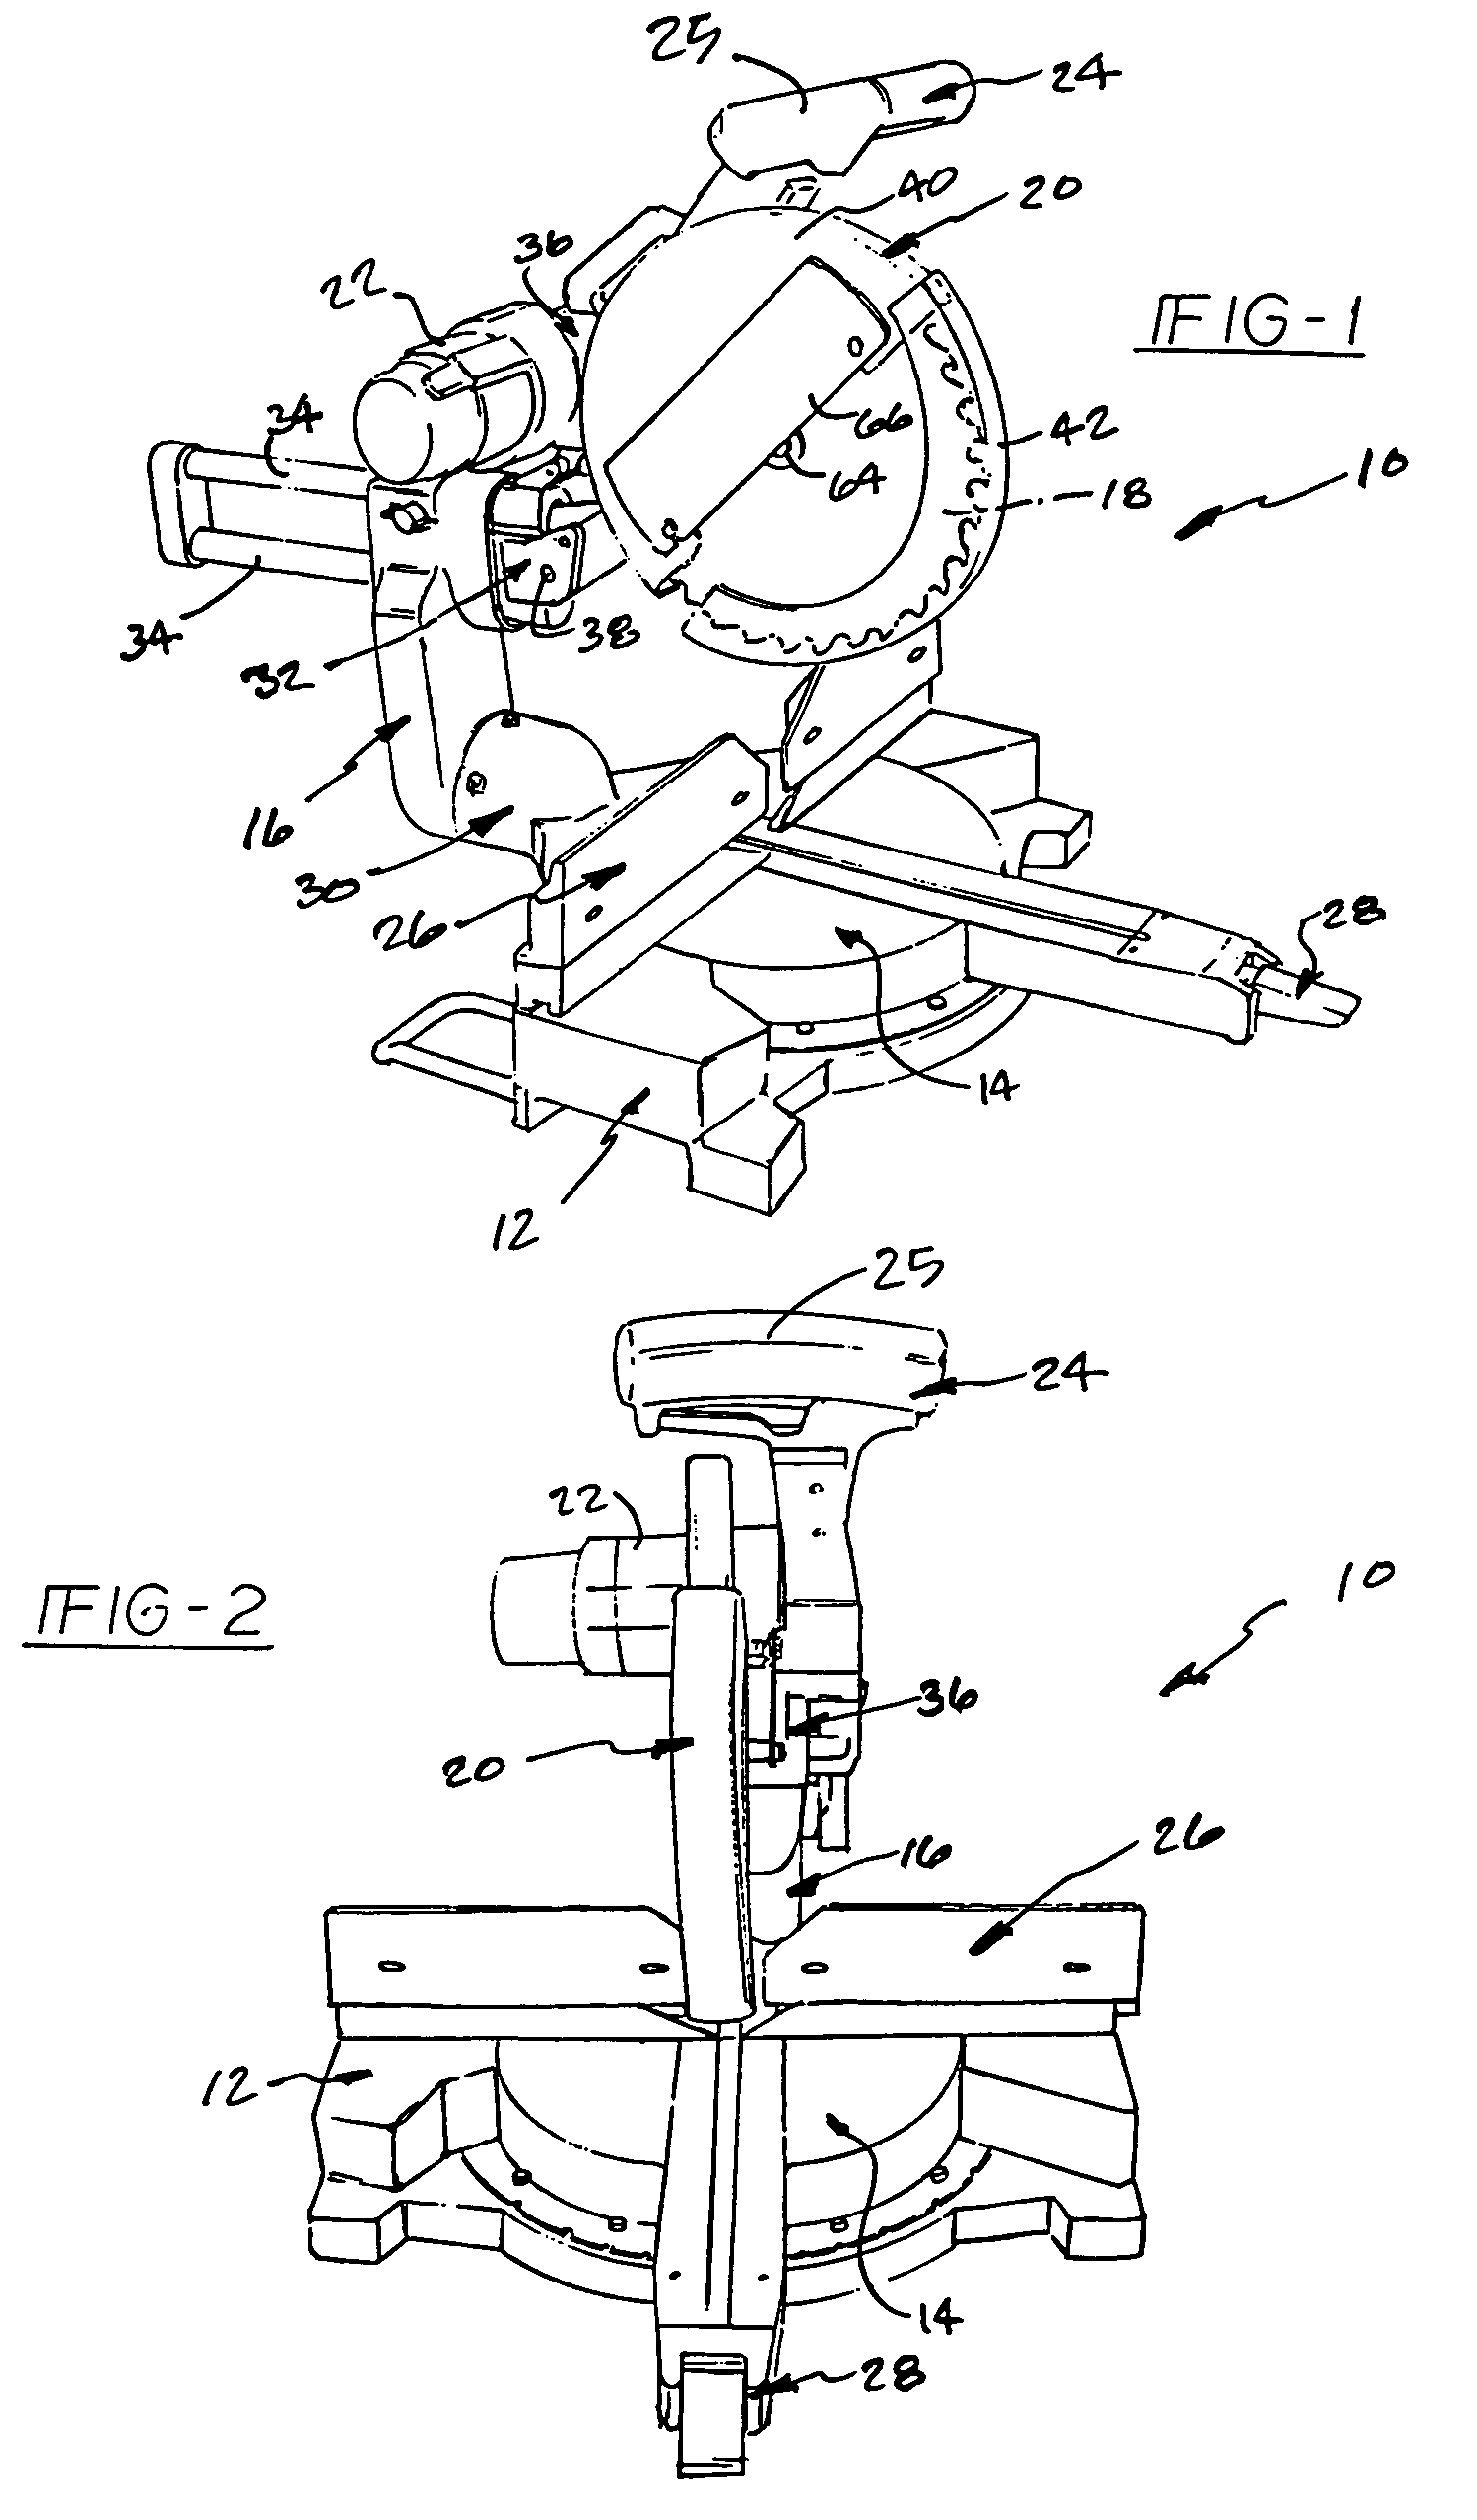 Guard and control apparatuses for sliding compound miter saw